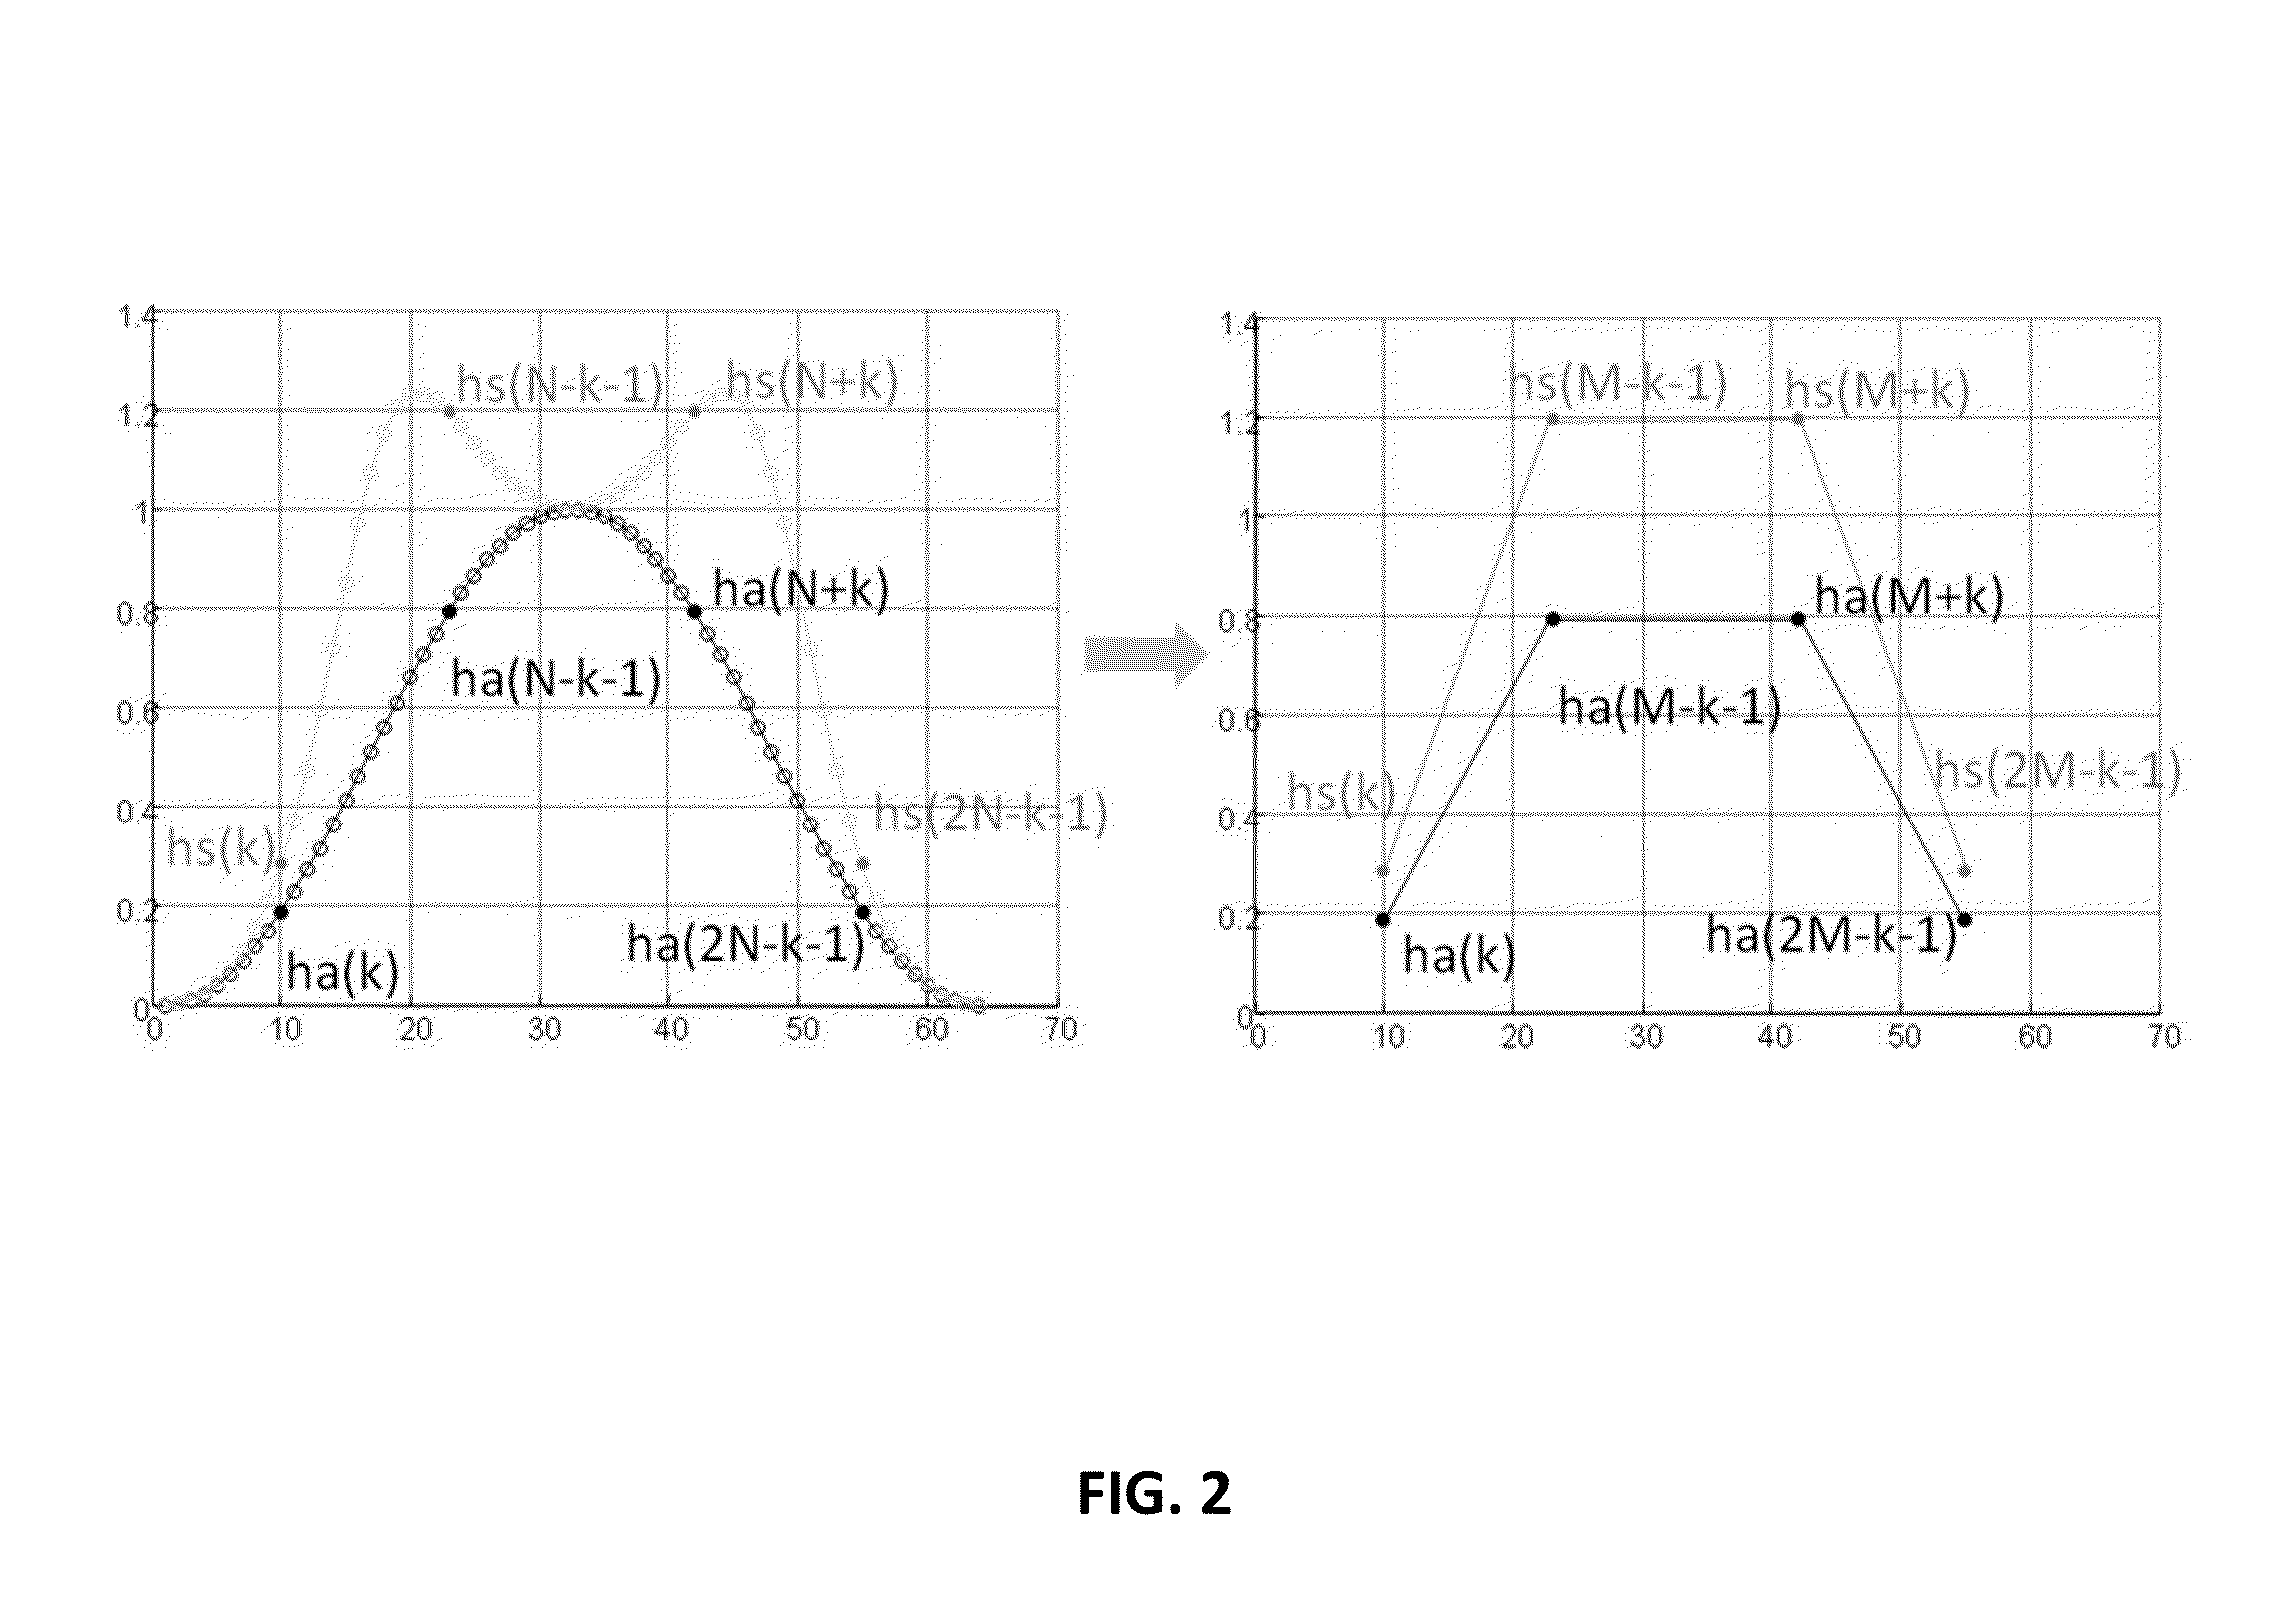 Adaptations of analysis or synthesis weighting windows for transform coding or decoding